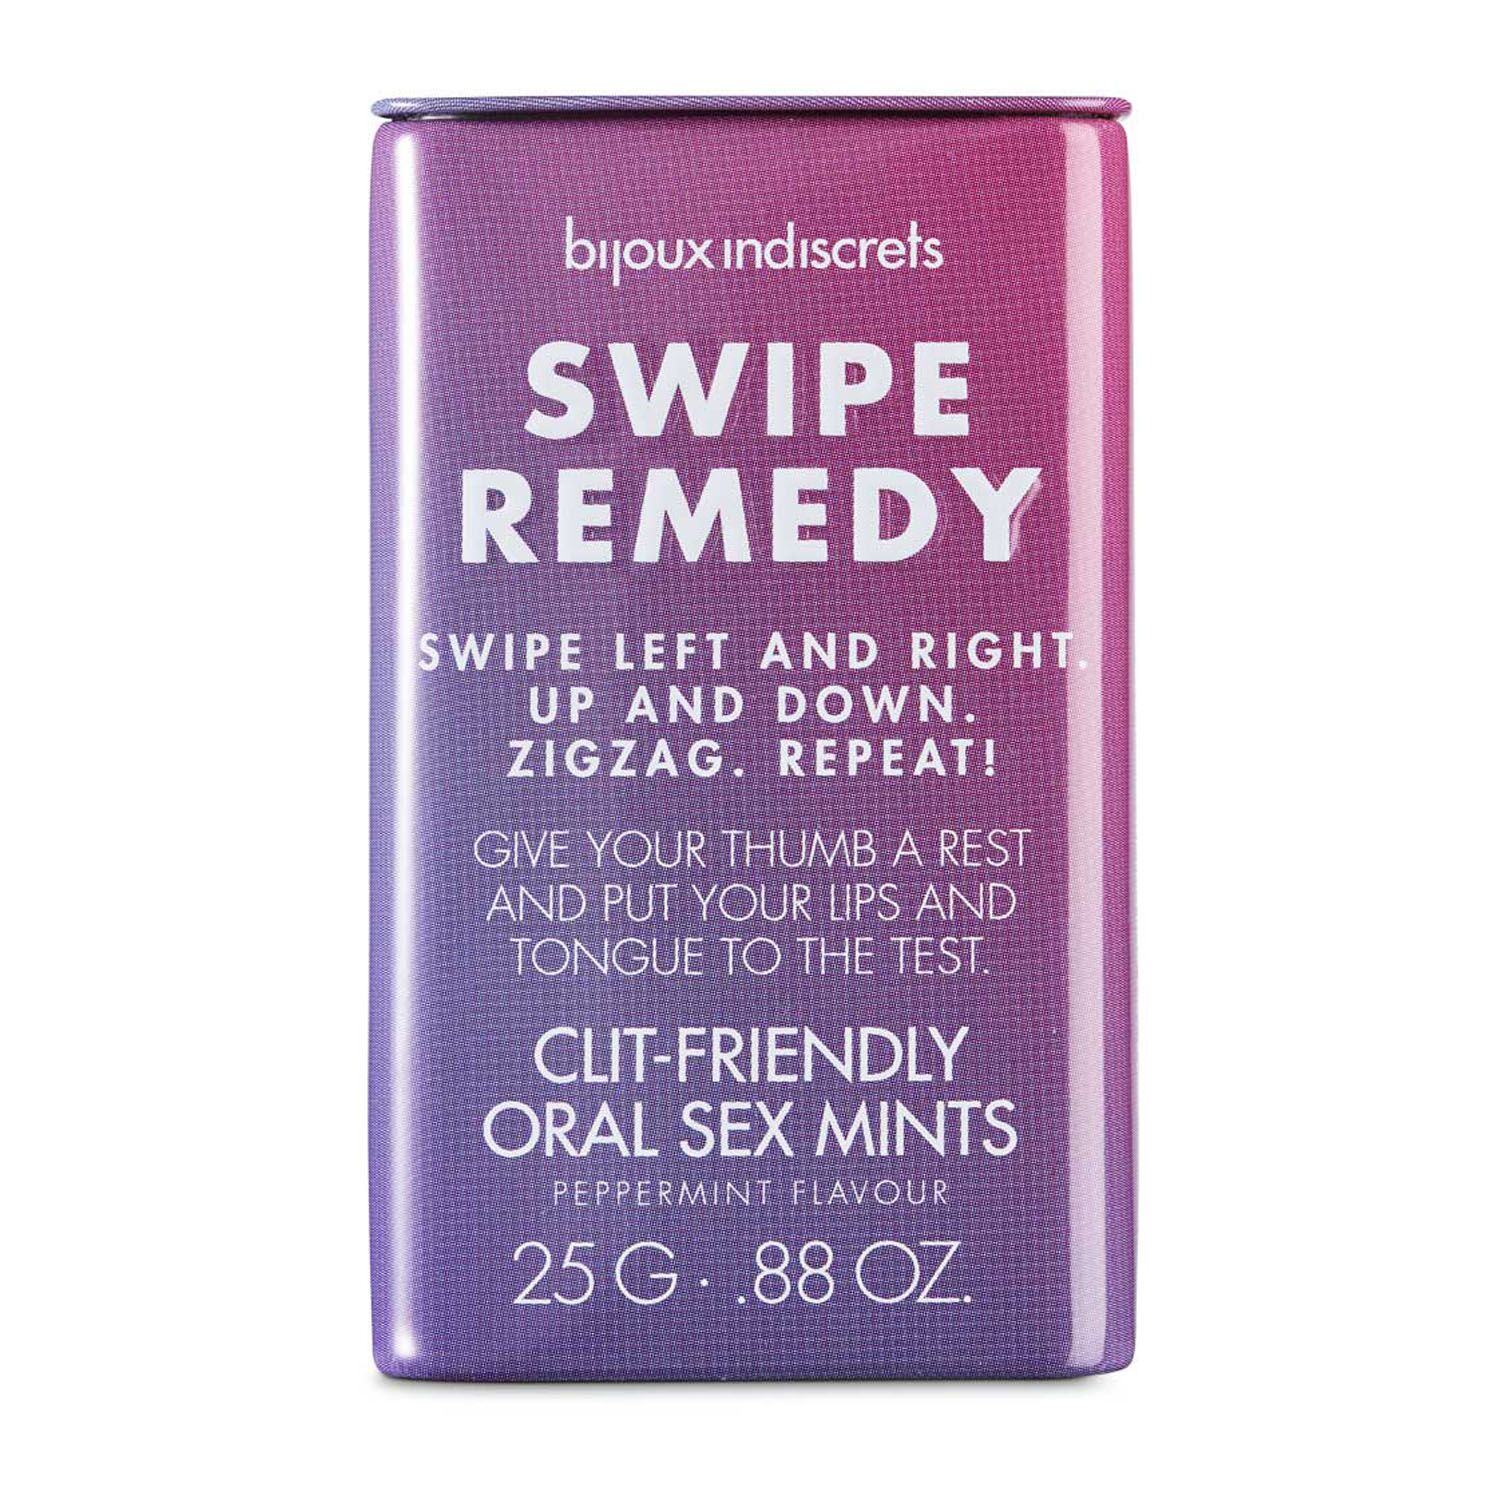   Bijoux Indiscrets SWIPE REMEDY — clitherapy oral sex mints